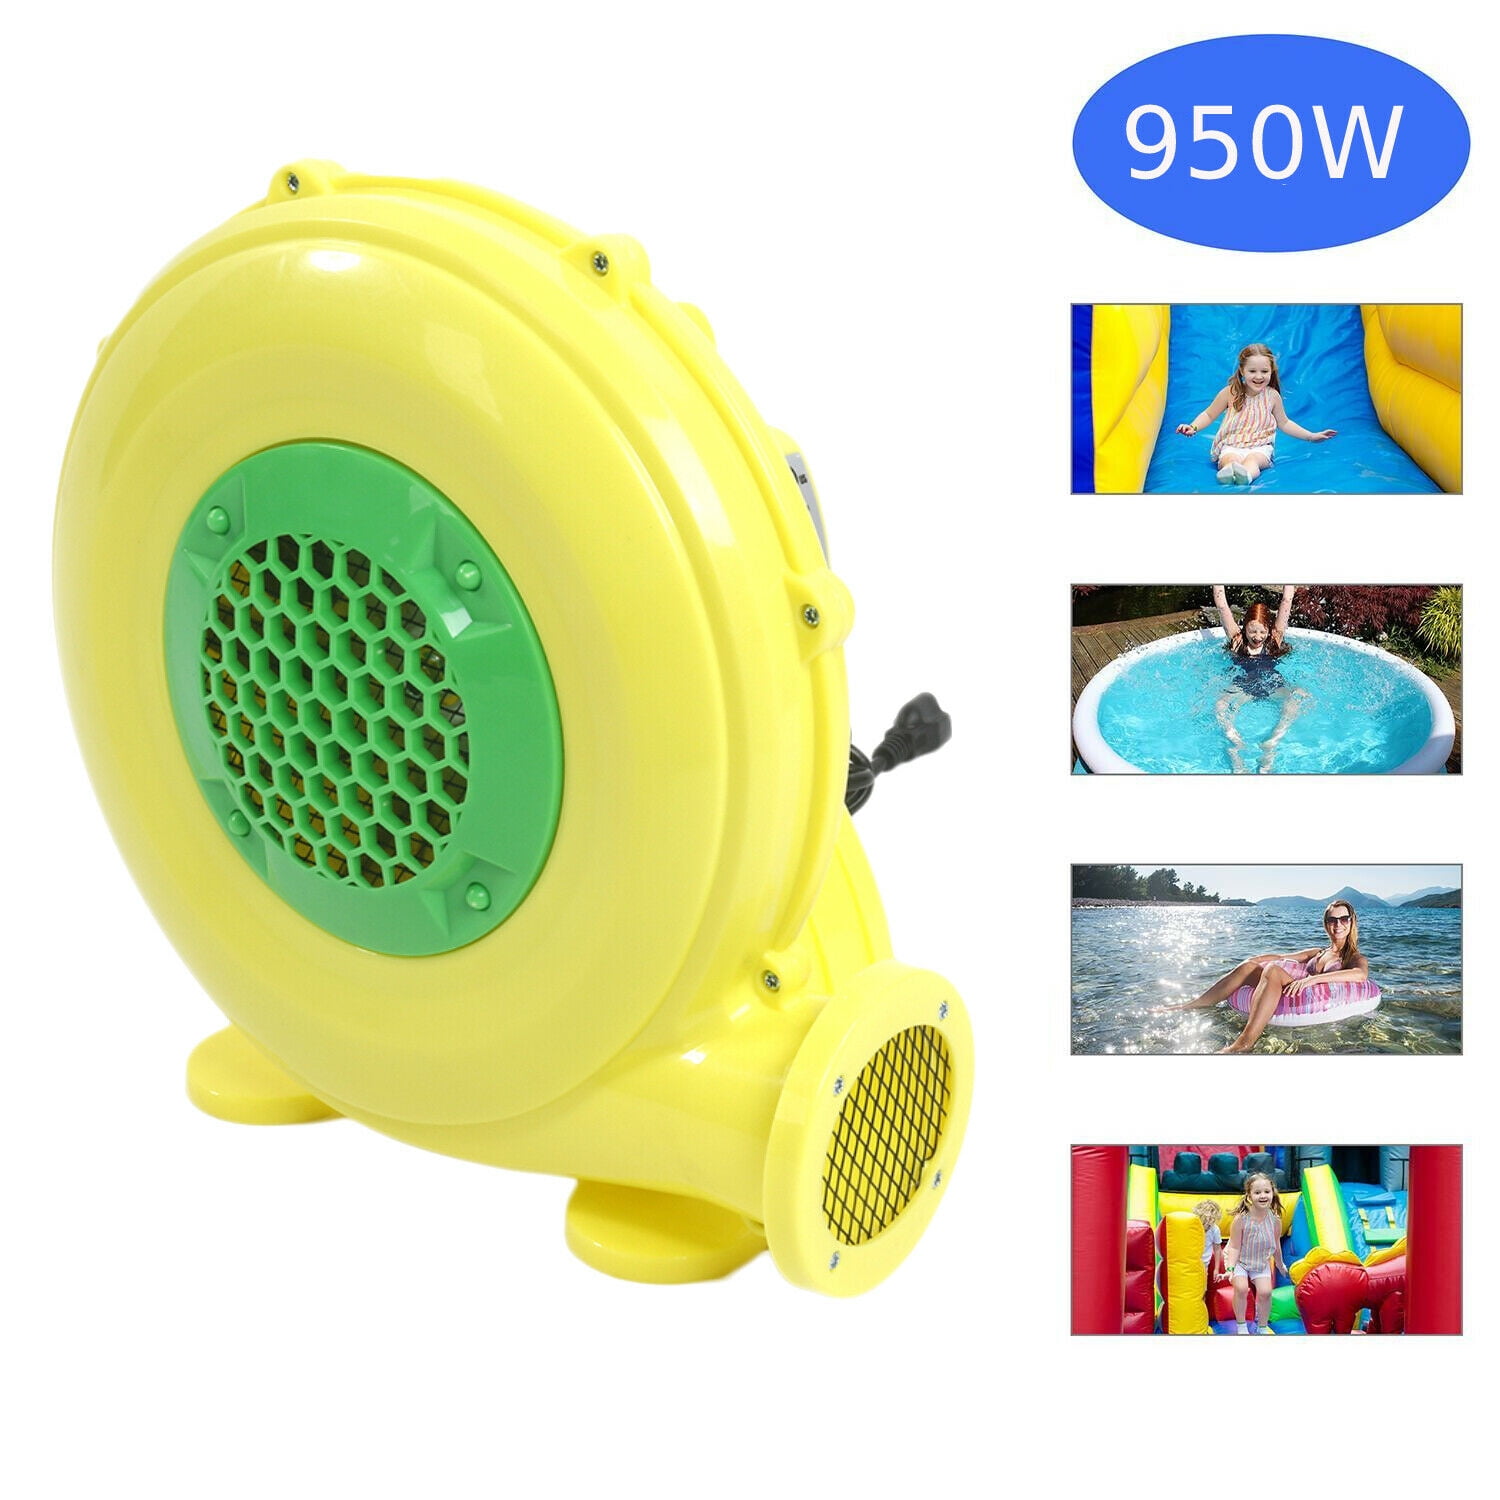 2HP 1500w blower/fun/pump for inflatable bounce house/slides with FREE SHIPPING 